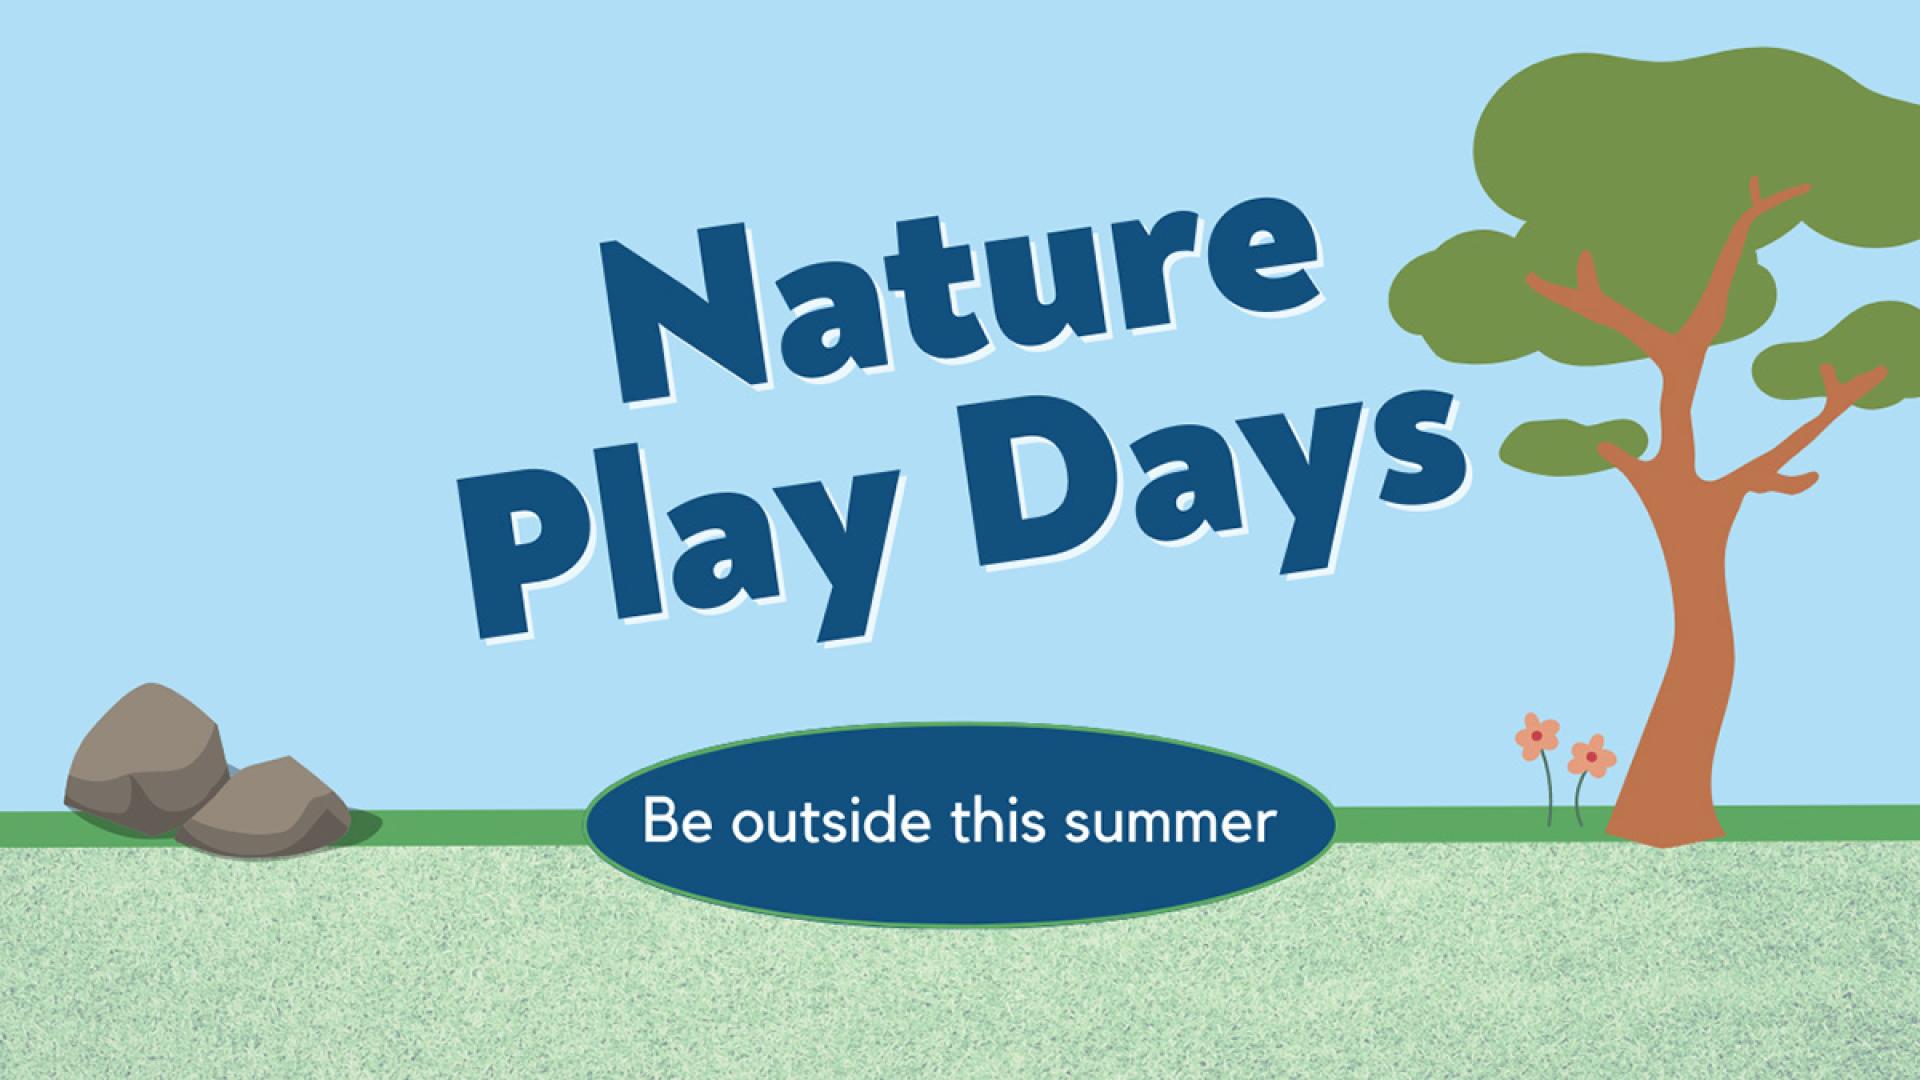 Image text: Nature Play Days | Be outside this summer